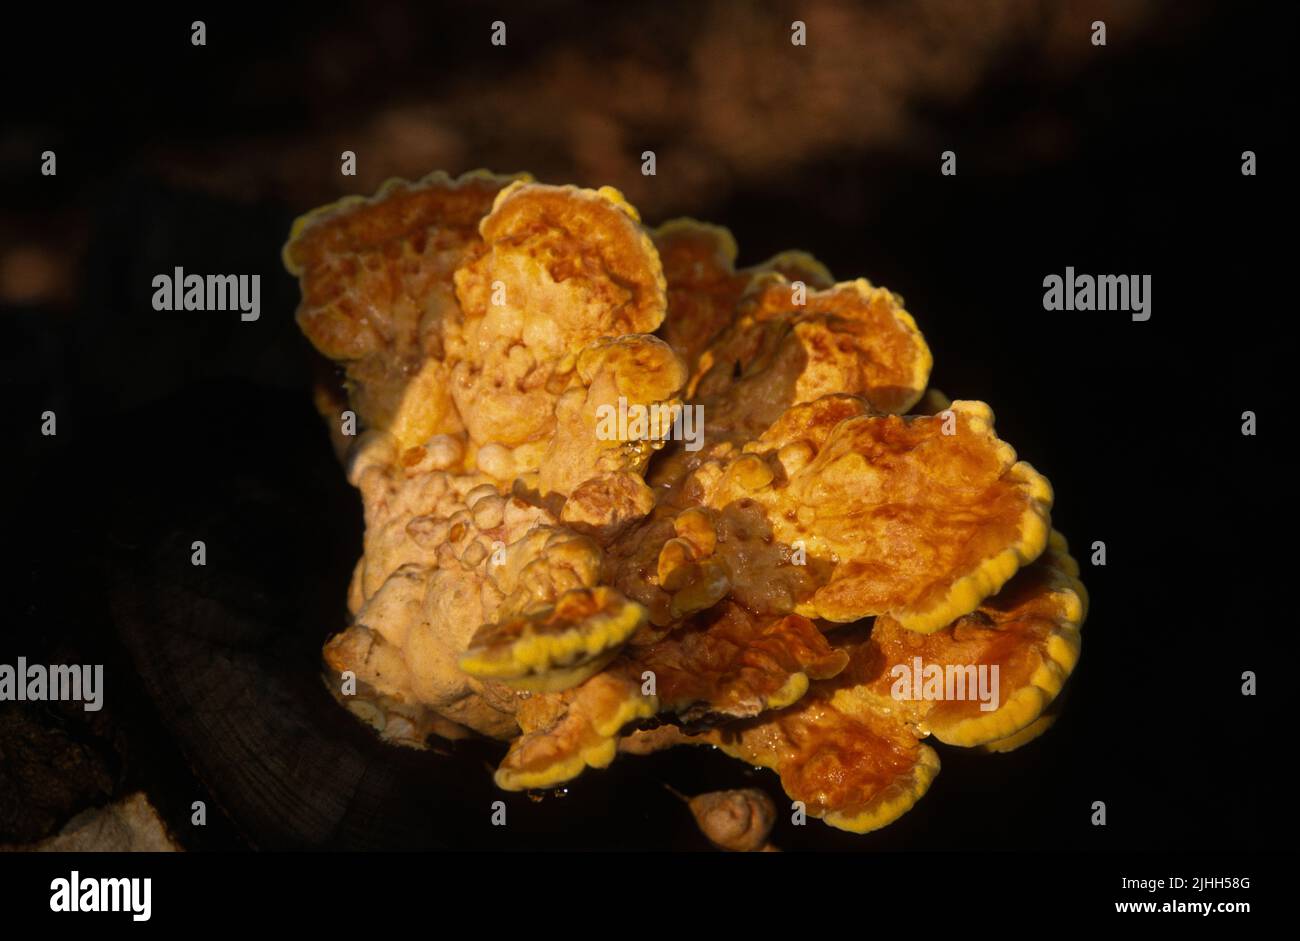 Fungus growing on a tree stump. A shot of a sulphur polypore seen on a hike, AKA Chicken of the woods or crab of the woods. Stock Photo